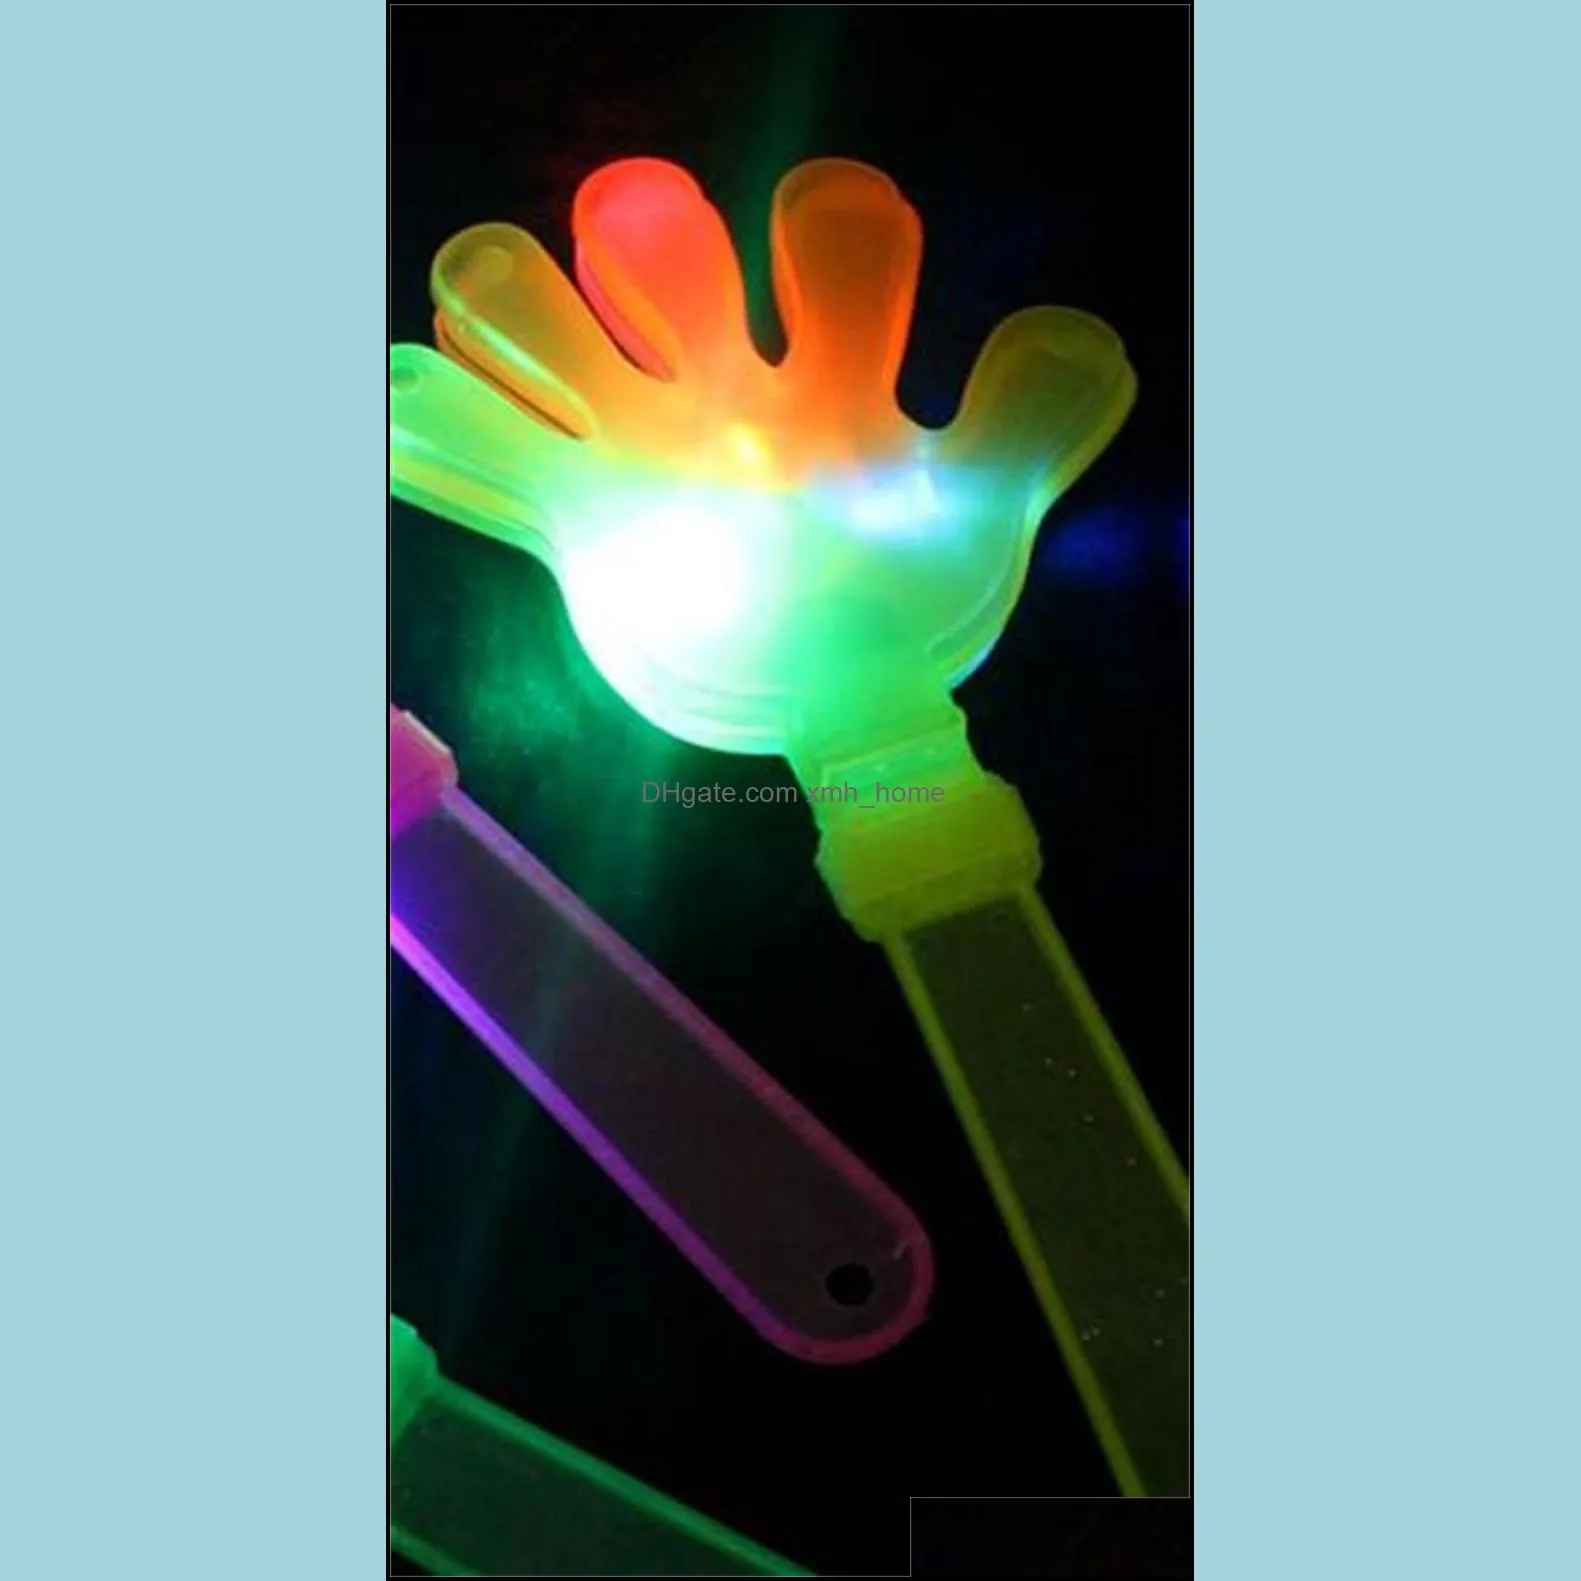 Clapper Led Light Cheer Prop Many Colour Clap Hands Toys Luminescence Fluorescence Palm Hand Beat Factory Direct Selling 1 3ct p1